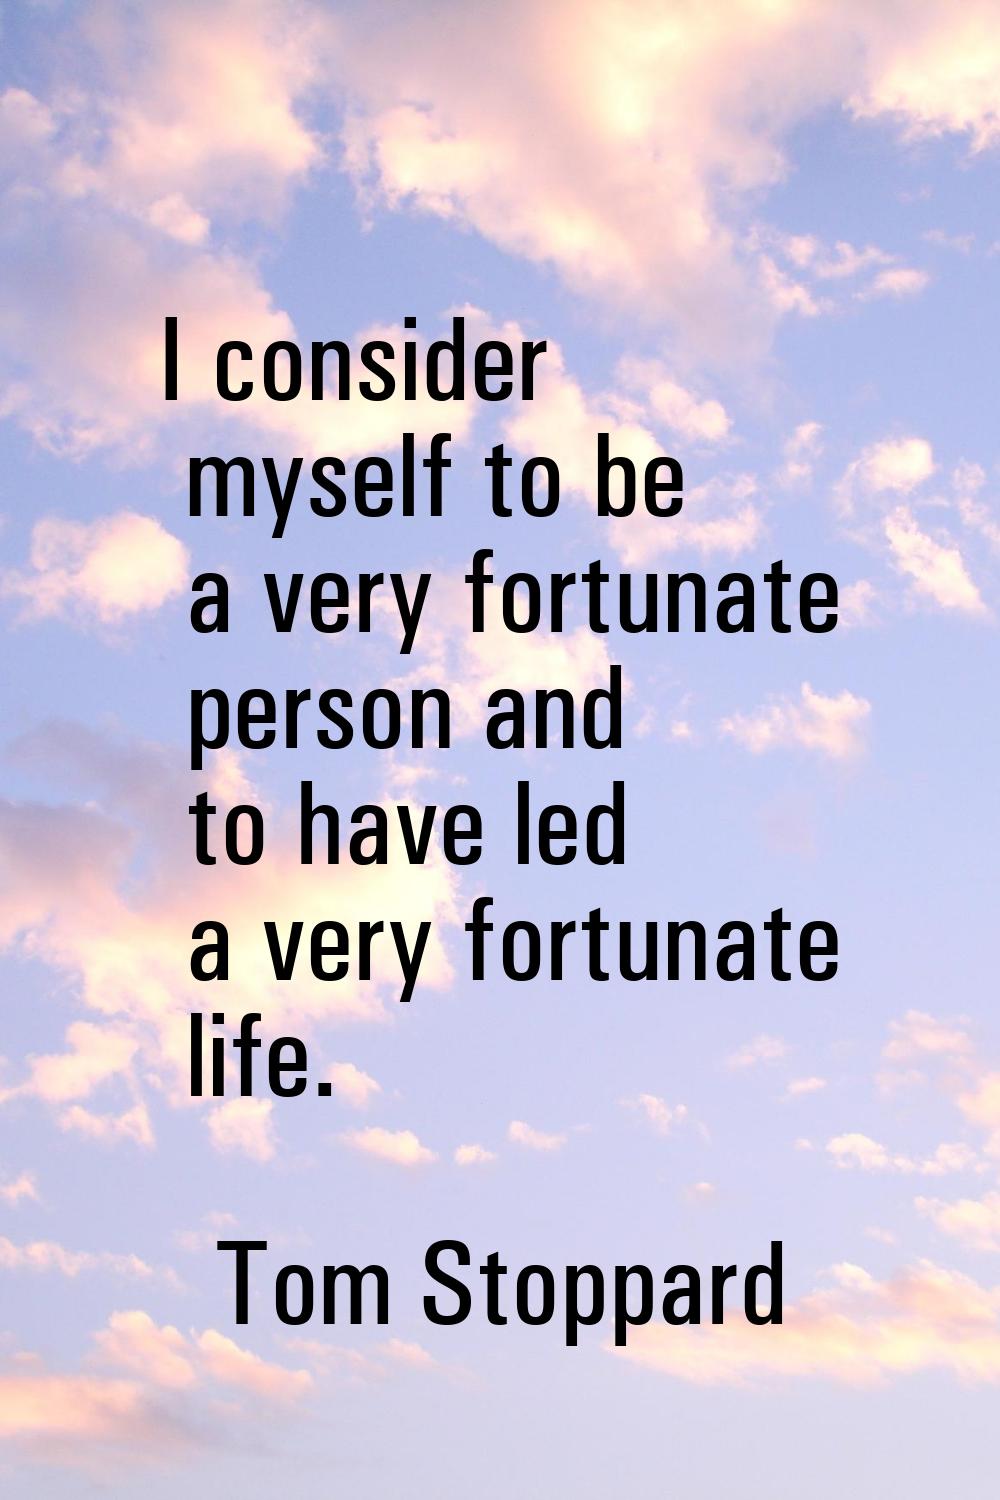 I consider myself to be a very fortunate person and to have led a very fortunate life.